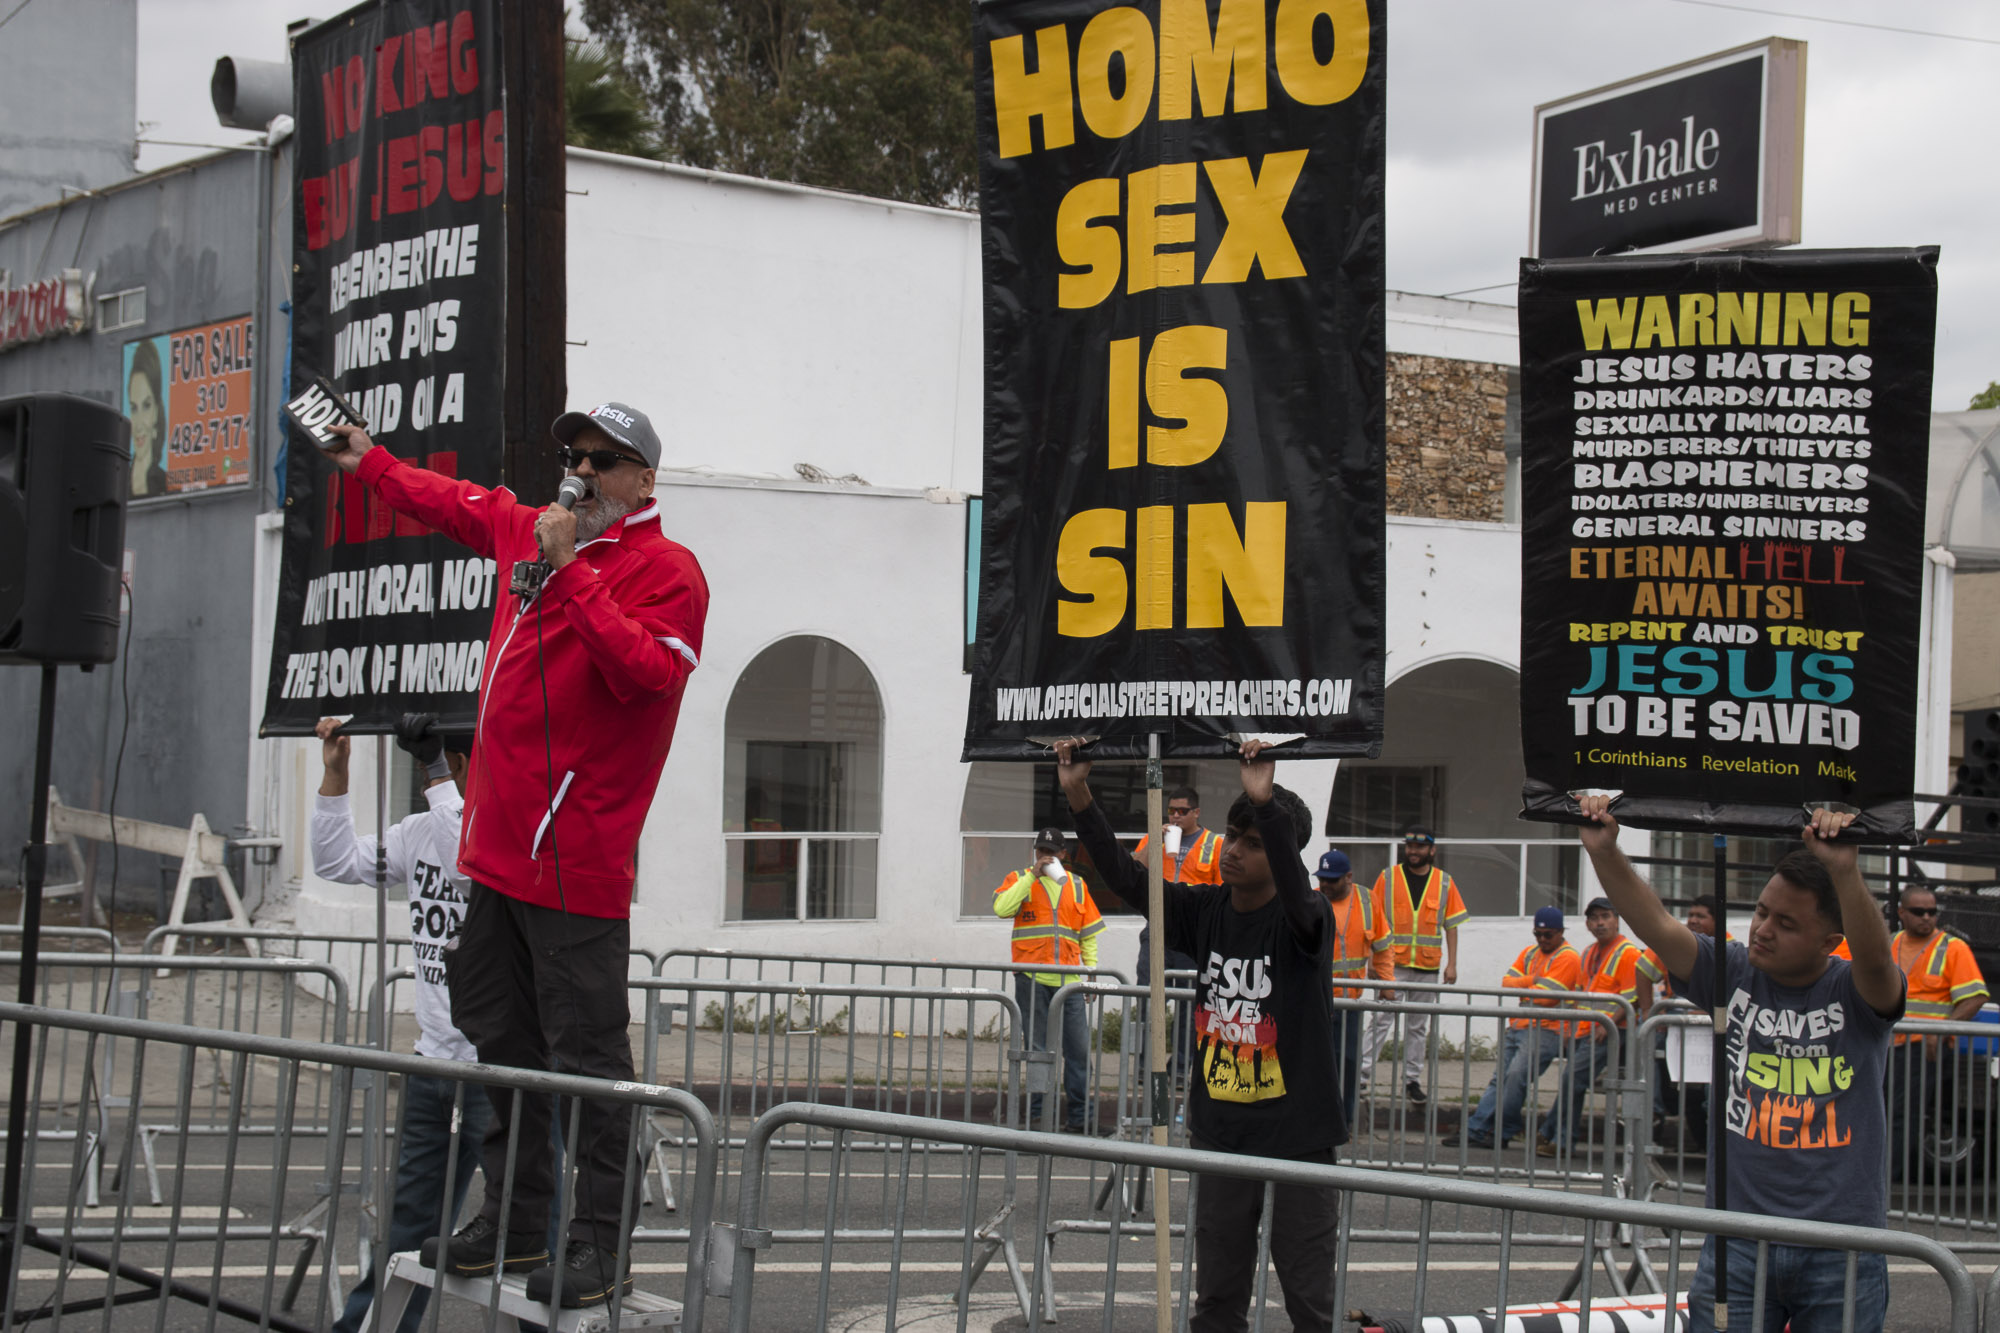 The usual anti-gay crowd at LA Pride. (Photo by Derek Wear of Unikorn Photography)